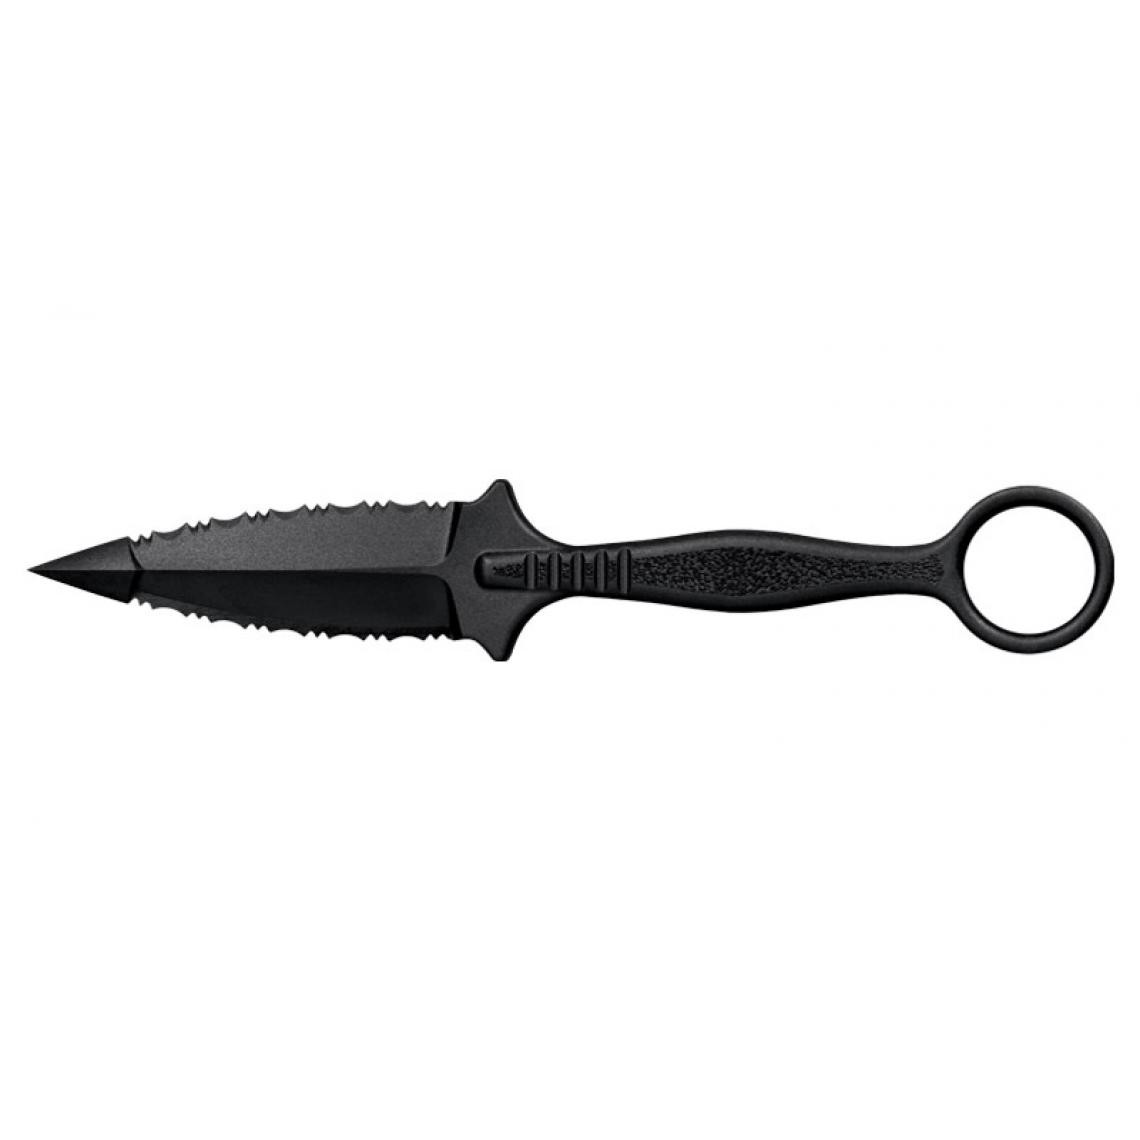 Divers Marques - COLD STEEL - CS92FR - FGX RING DAGGER - Outils de coupe